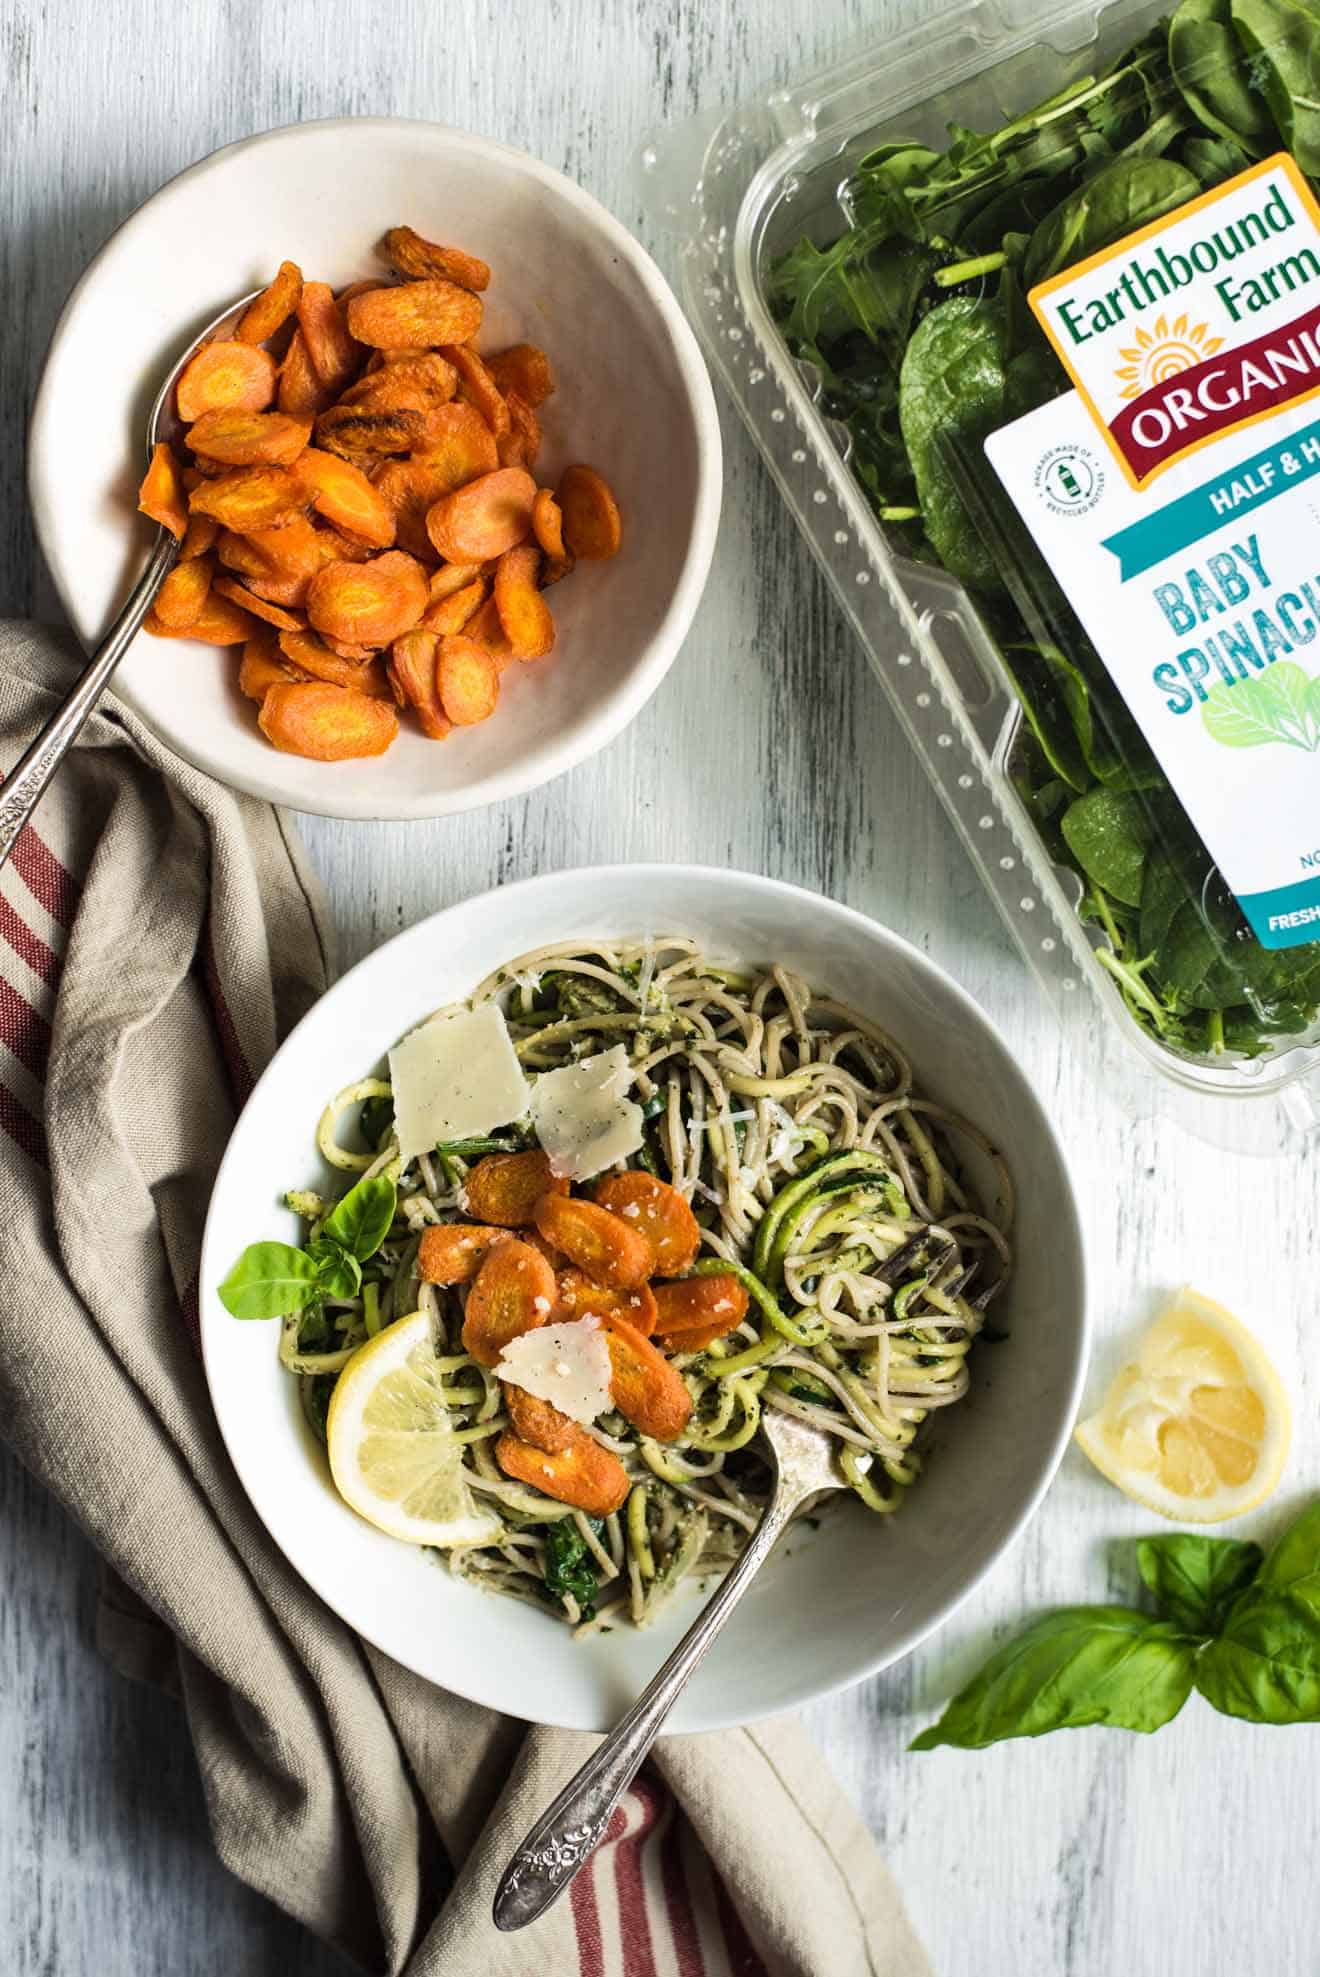 Spring Pasta with Carrot Top Pesto - easy gluten-free, vegetarian dinner in 30 minutes! by @healthynibs